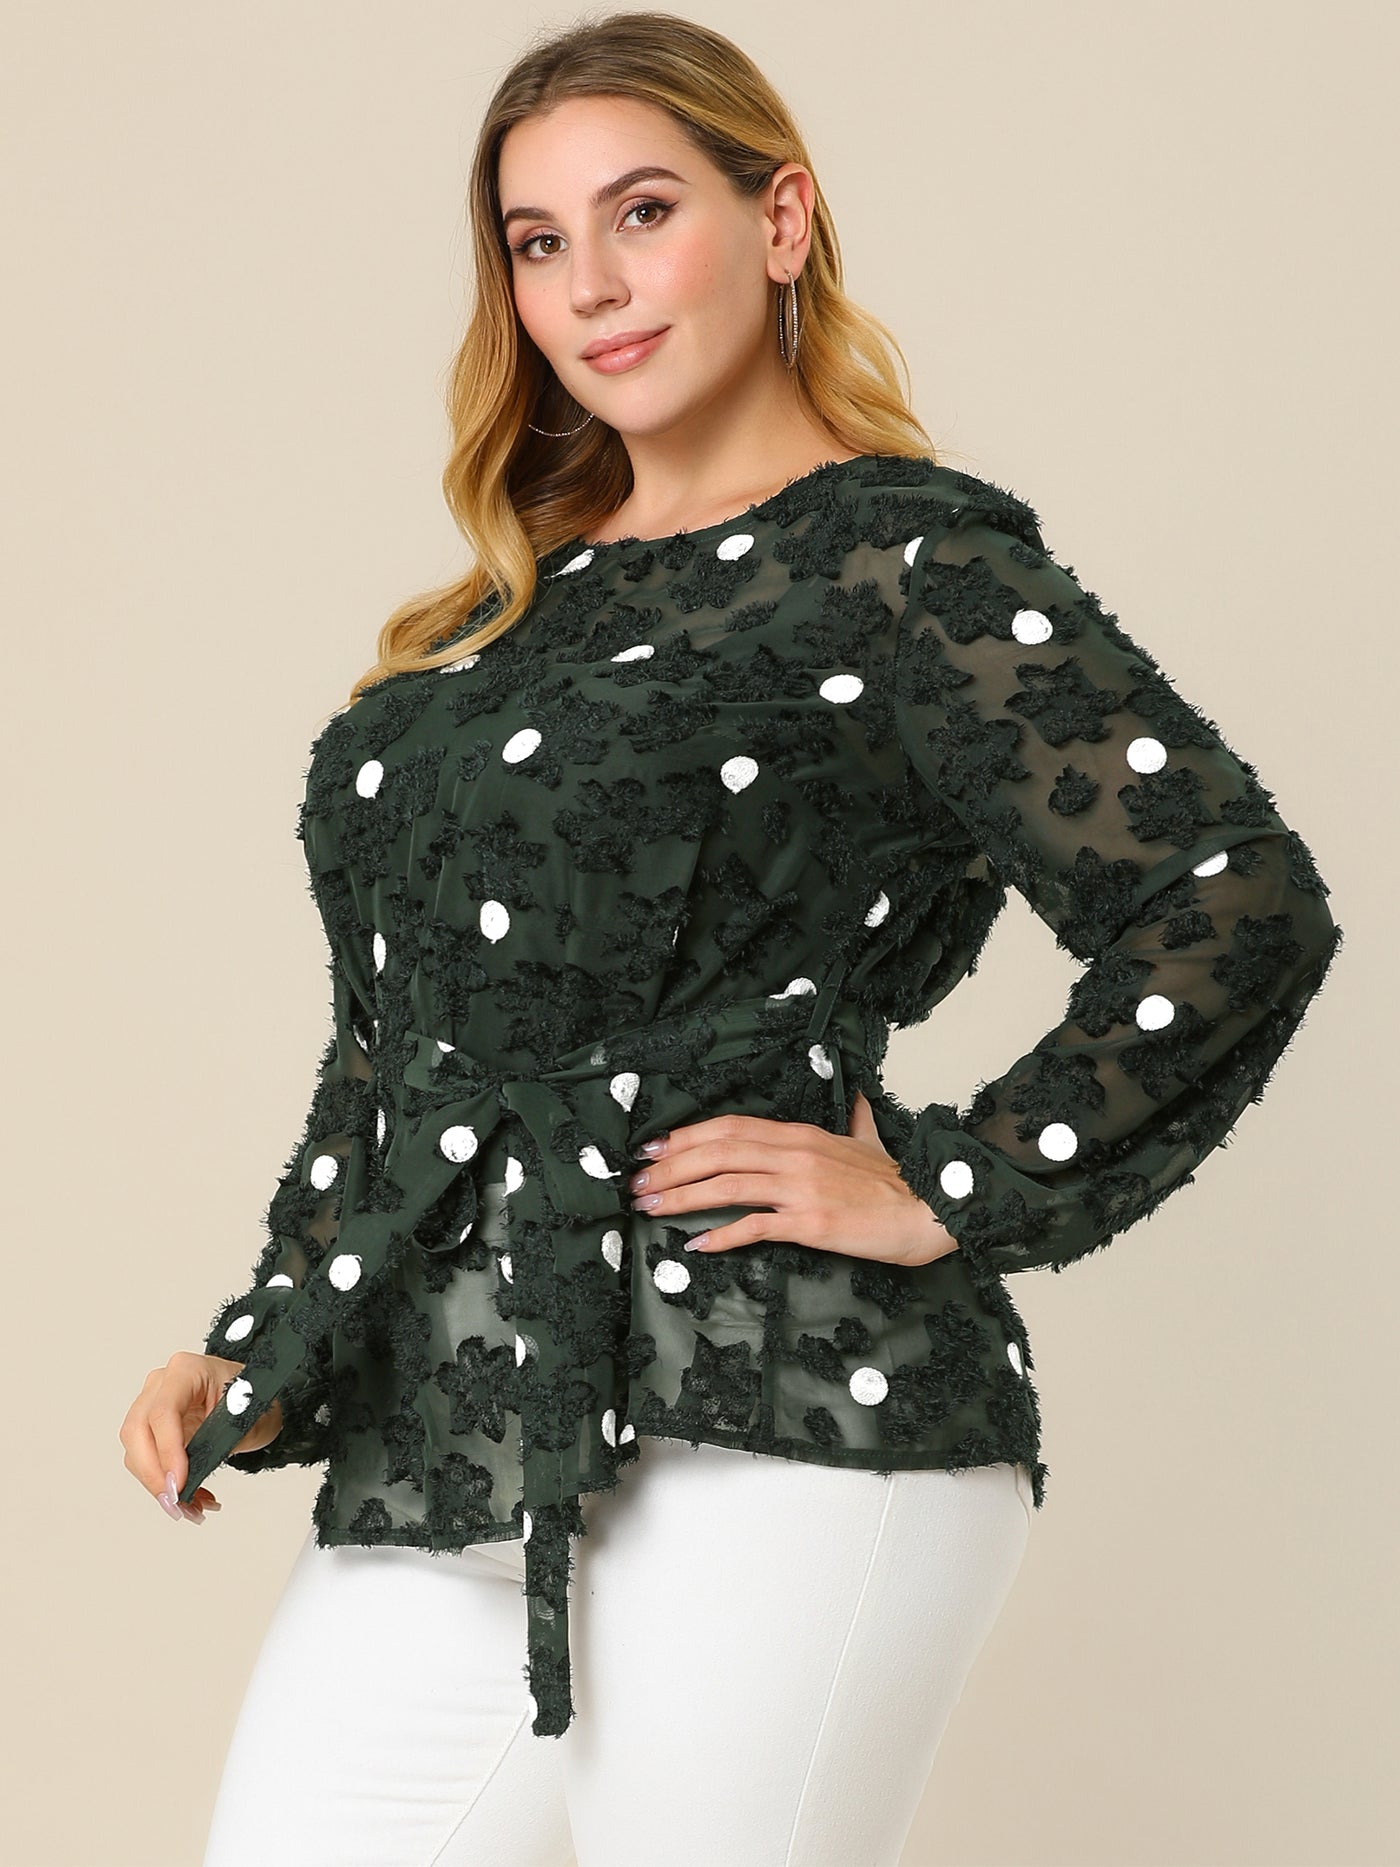 Bublédon Plus Size Belted Waisted Polka Dots Peplum Mesh Lace Top